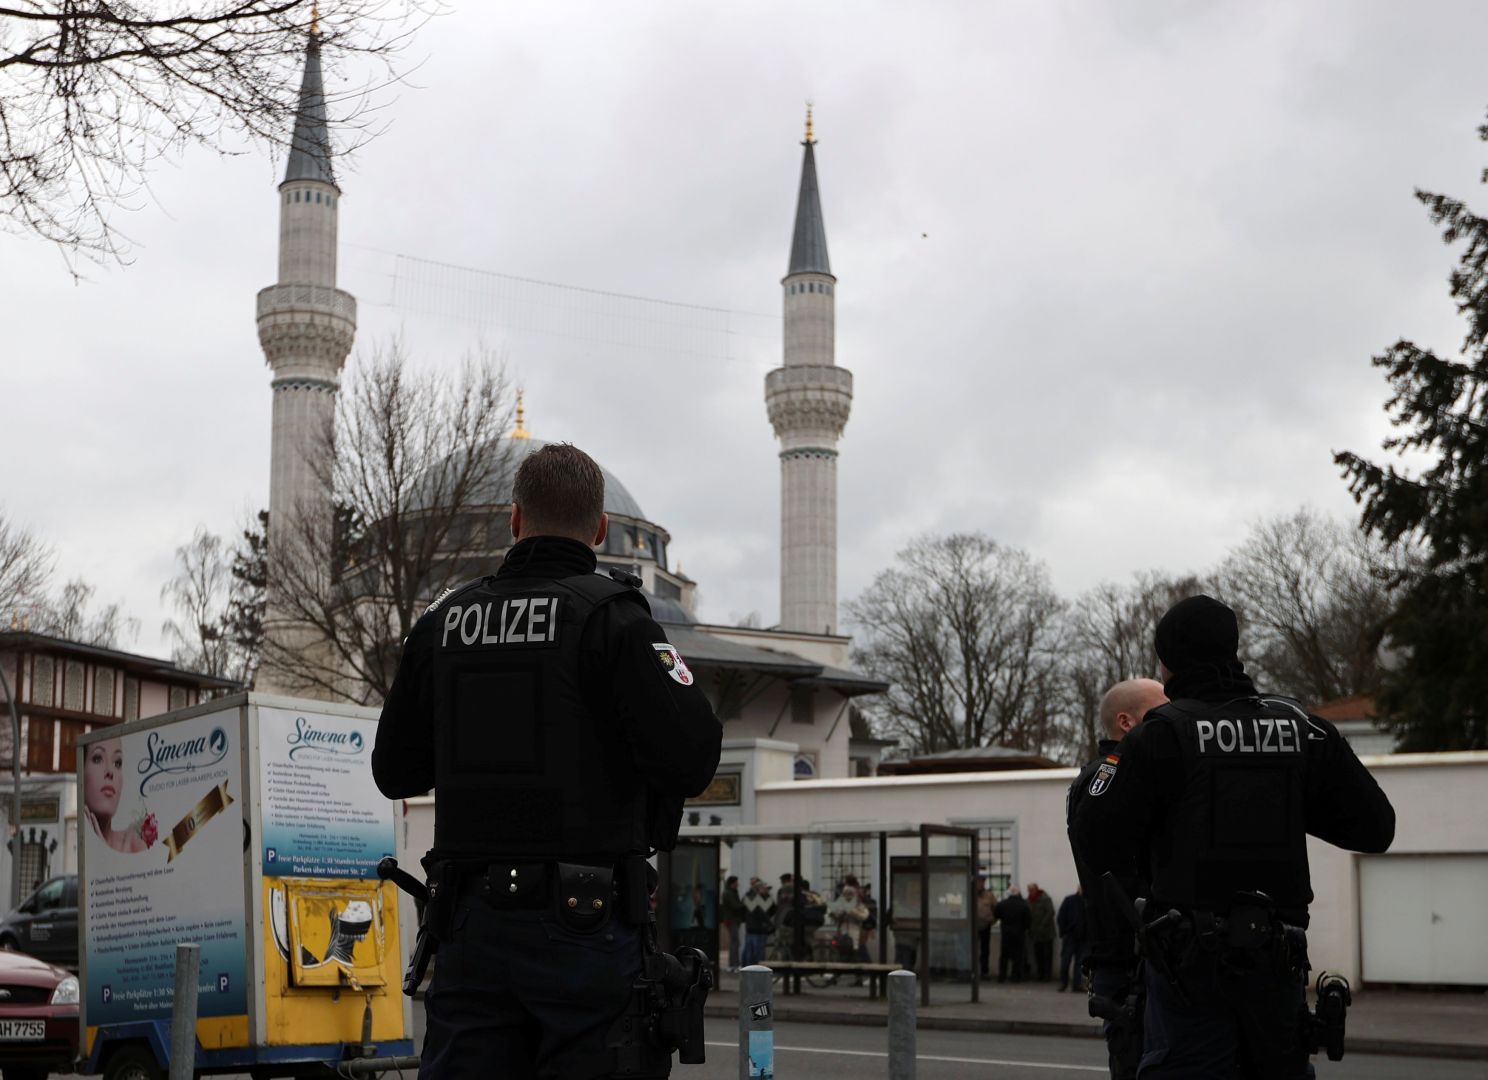 Muslim woman faces police brutality in Berlin [PHOTOS/VIDEO]